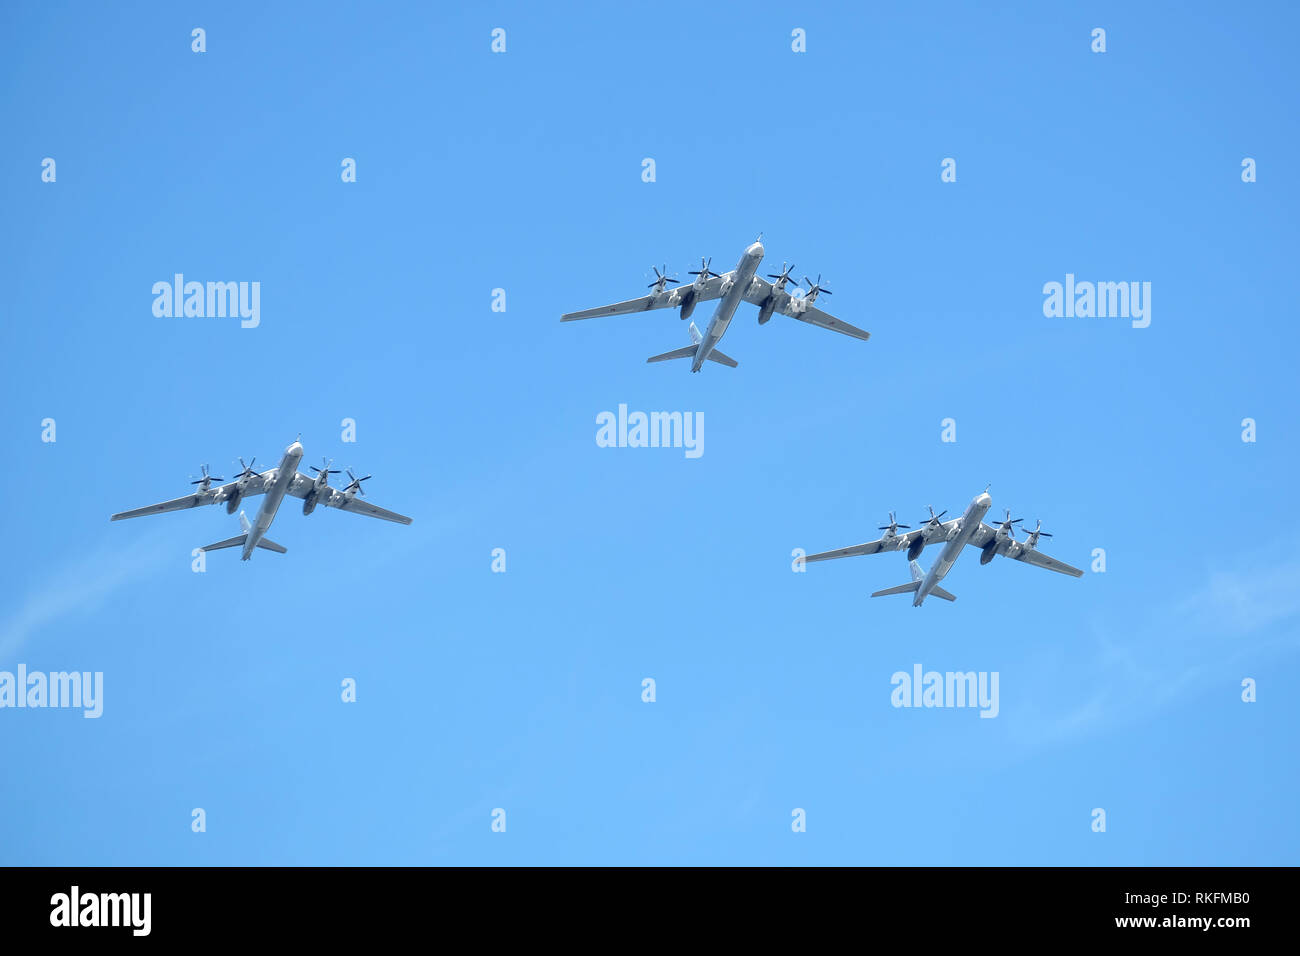 MOSCOW, RUSSIA - MAY 9, 2018: Three Russian military turboprop strategic bombers-missile Tu-95 Bear in flight in blue sky on parade on May 9, 2018 Stock Photo